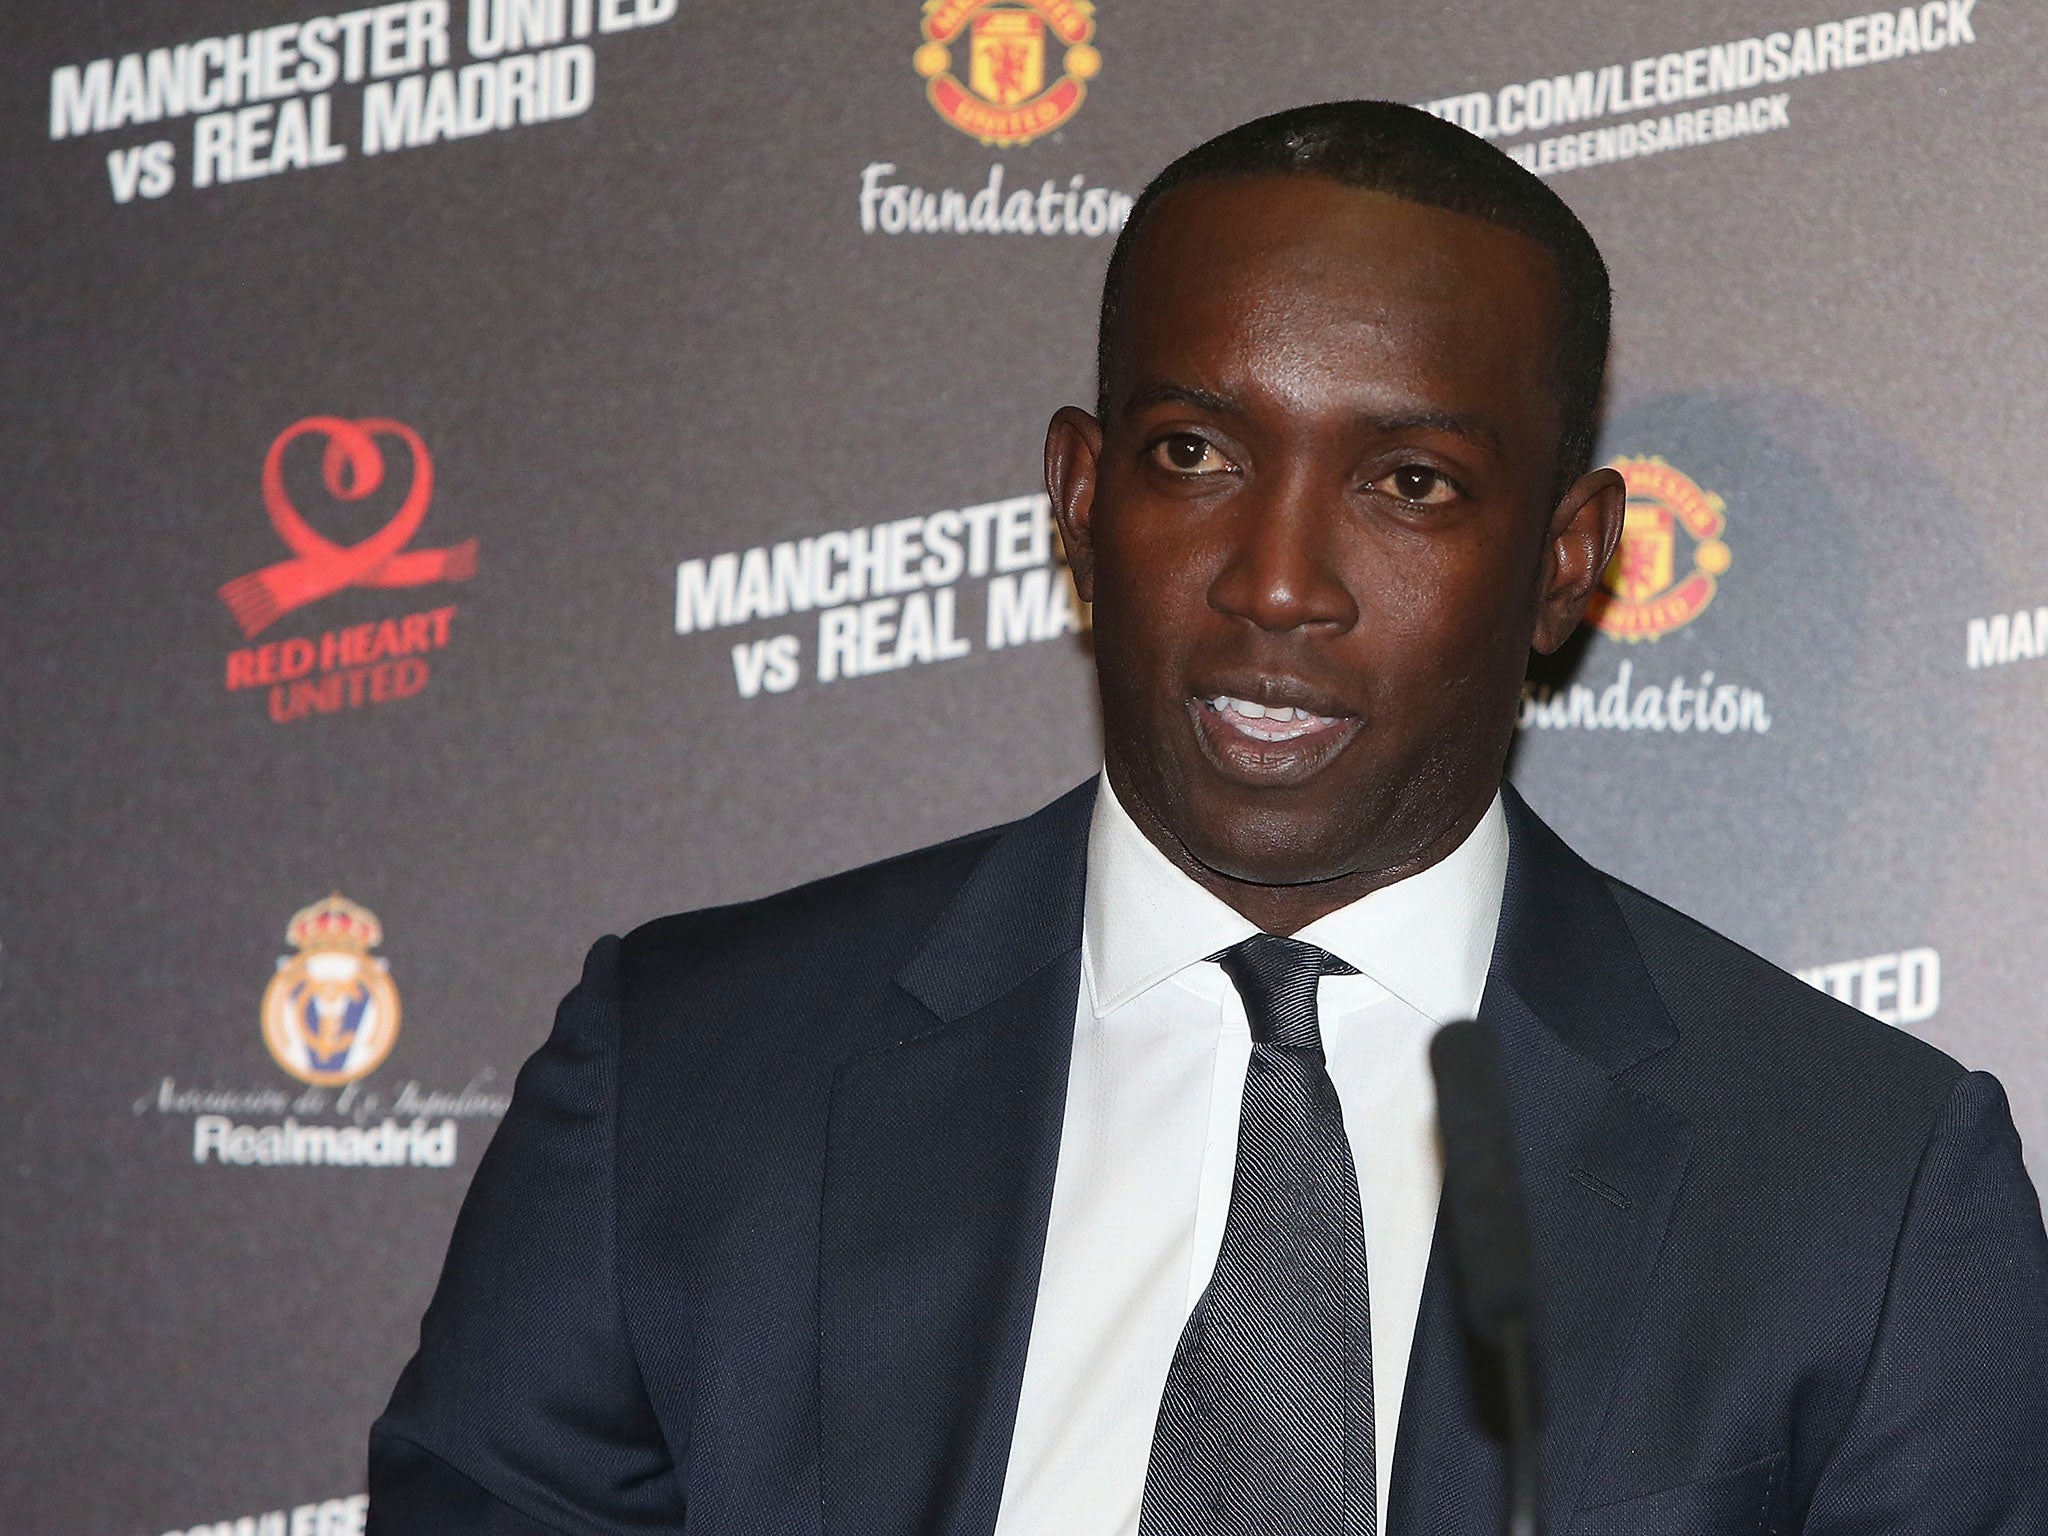 Dwight Yorke says his colour has prevented him from becoming a manager